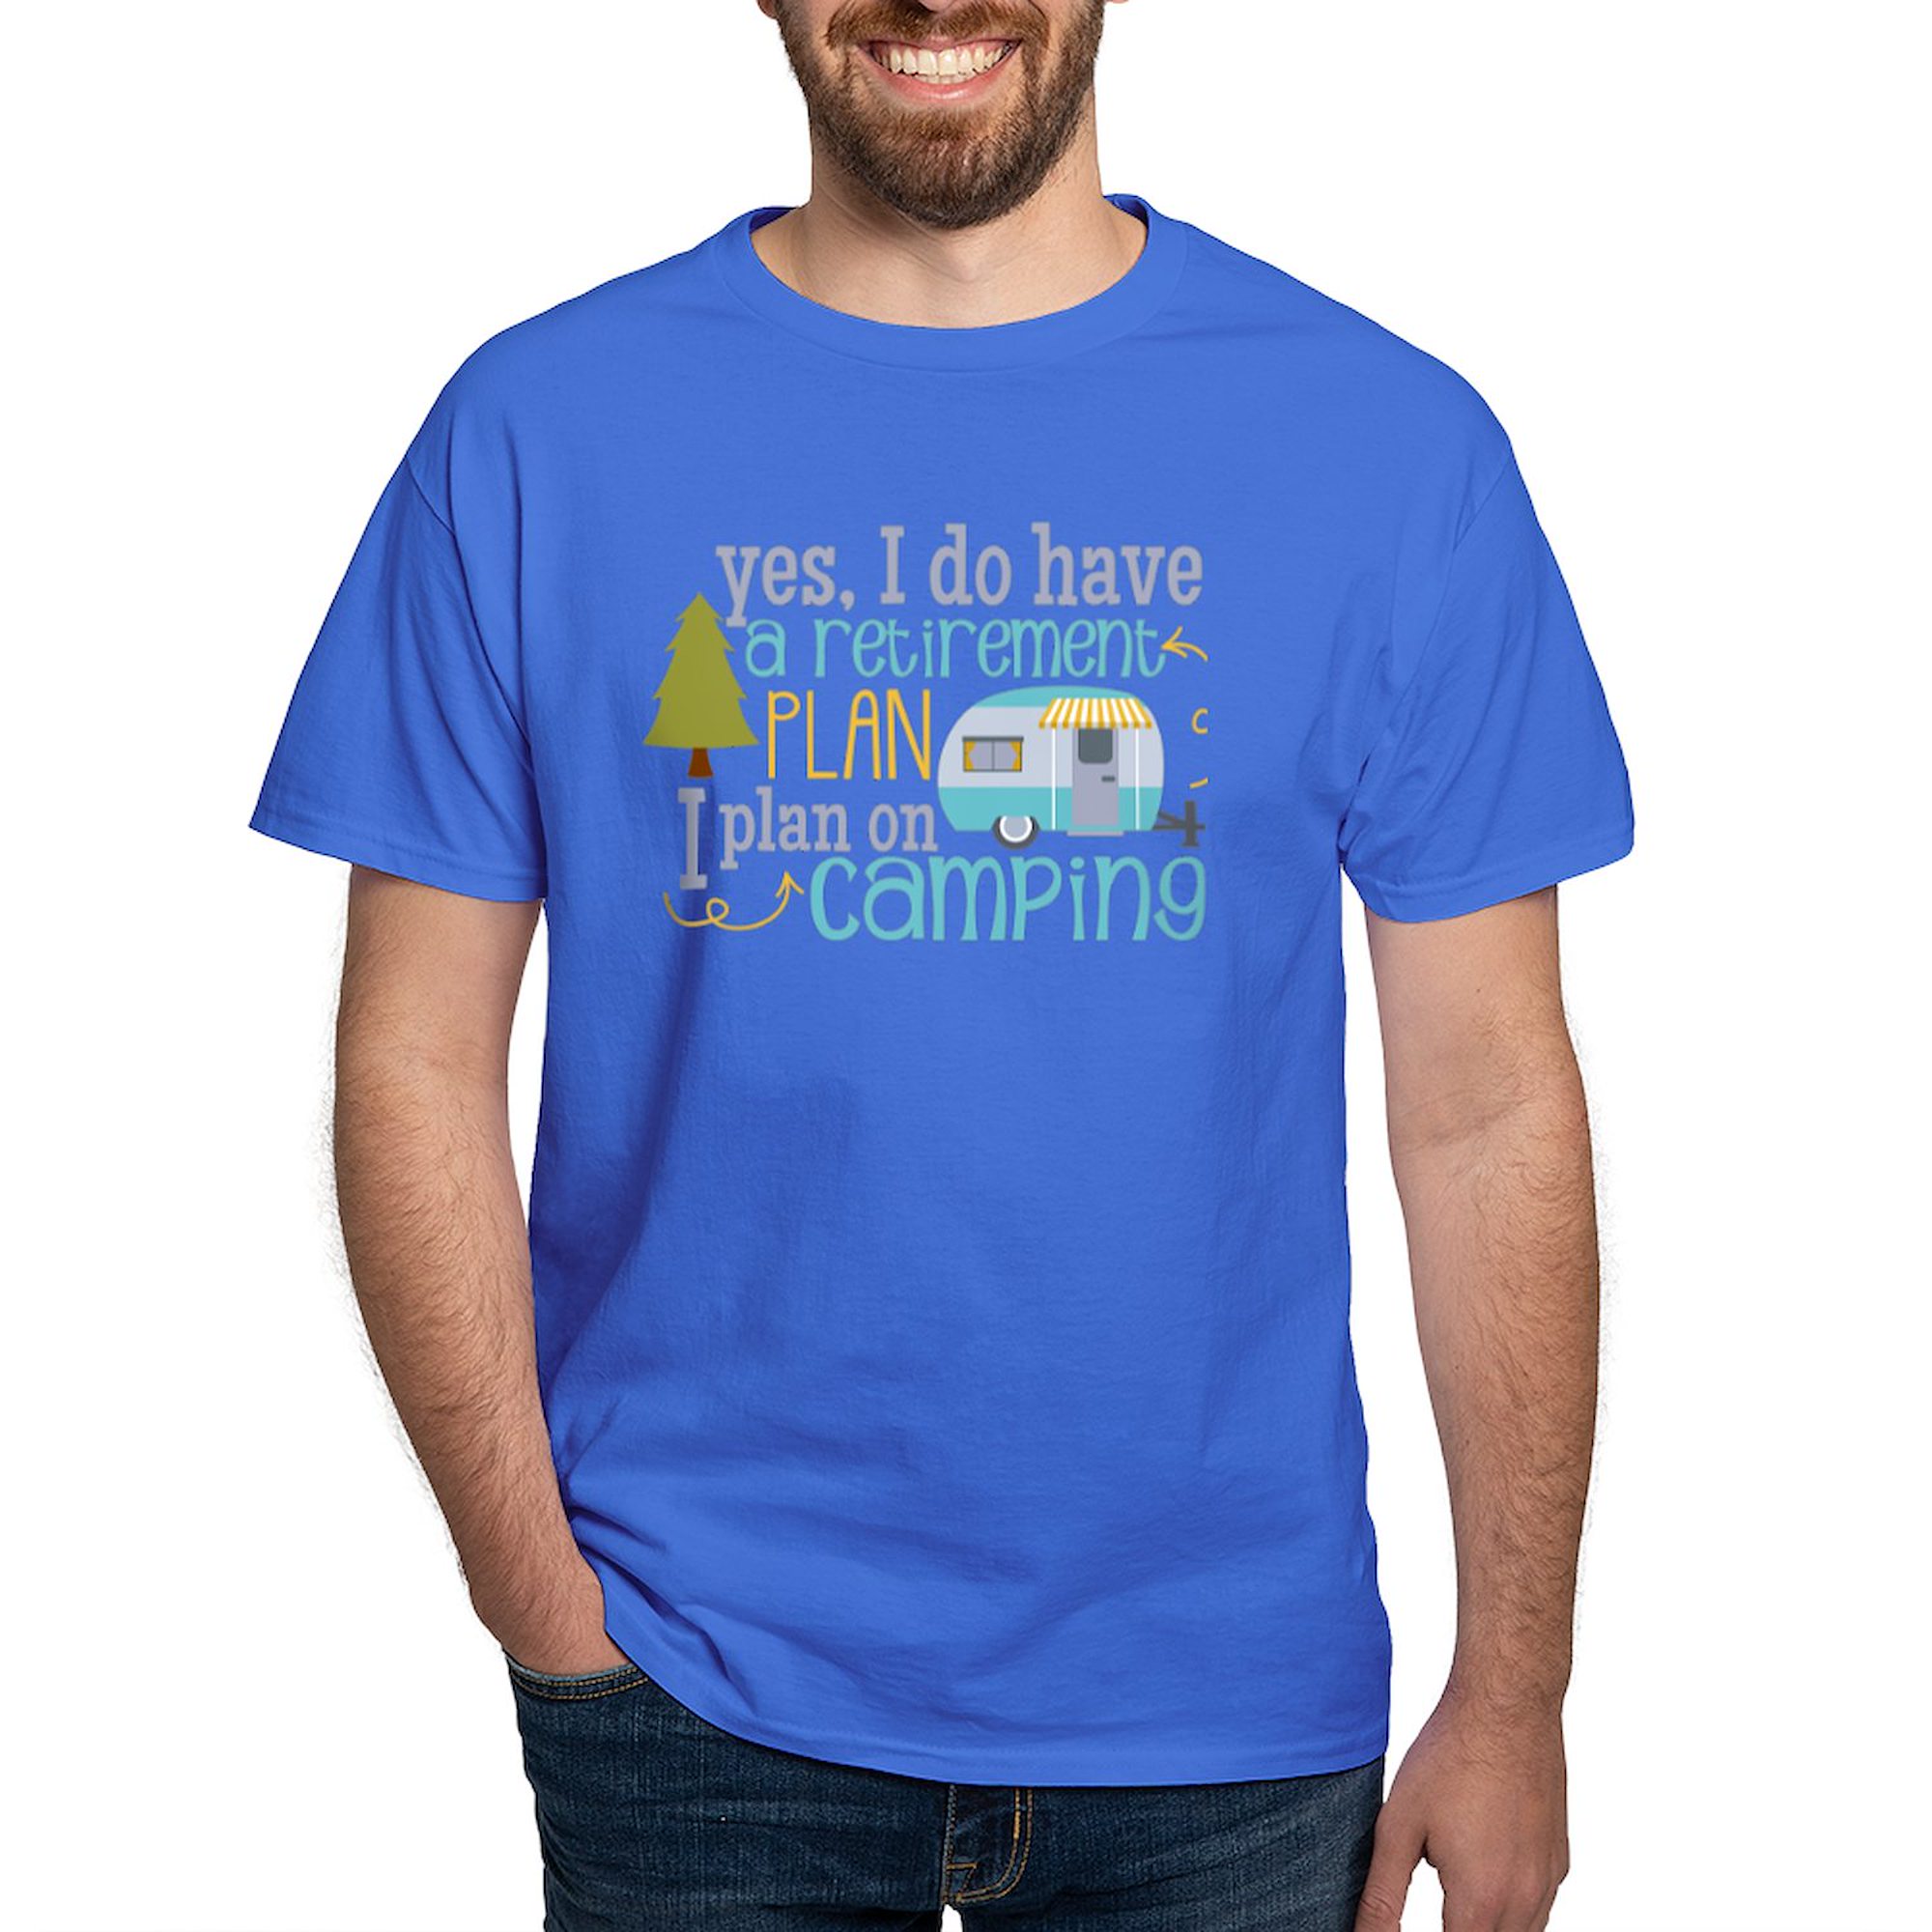 CafePress - Yes, I Do Have A Retirement Plan I Plan On Camping - 100% Cotton T-Shirt - image 1 of 4